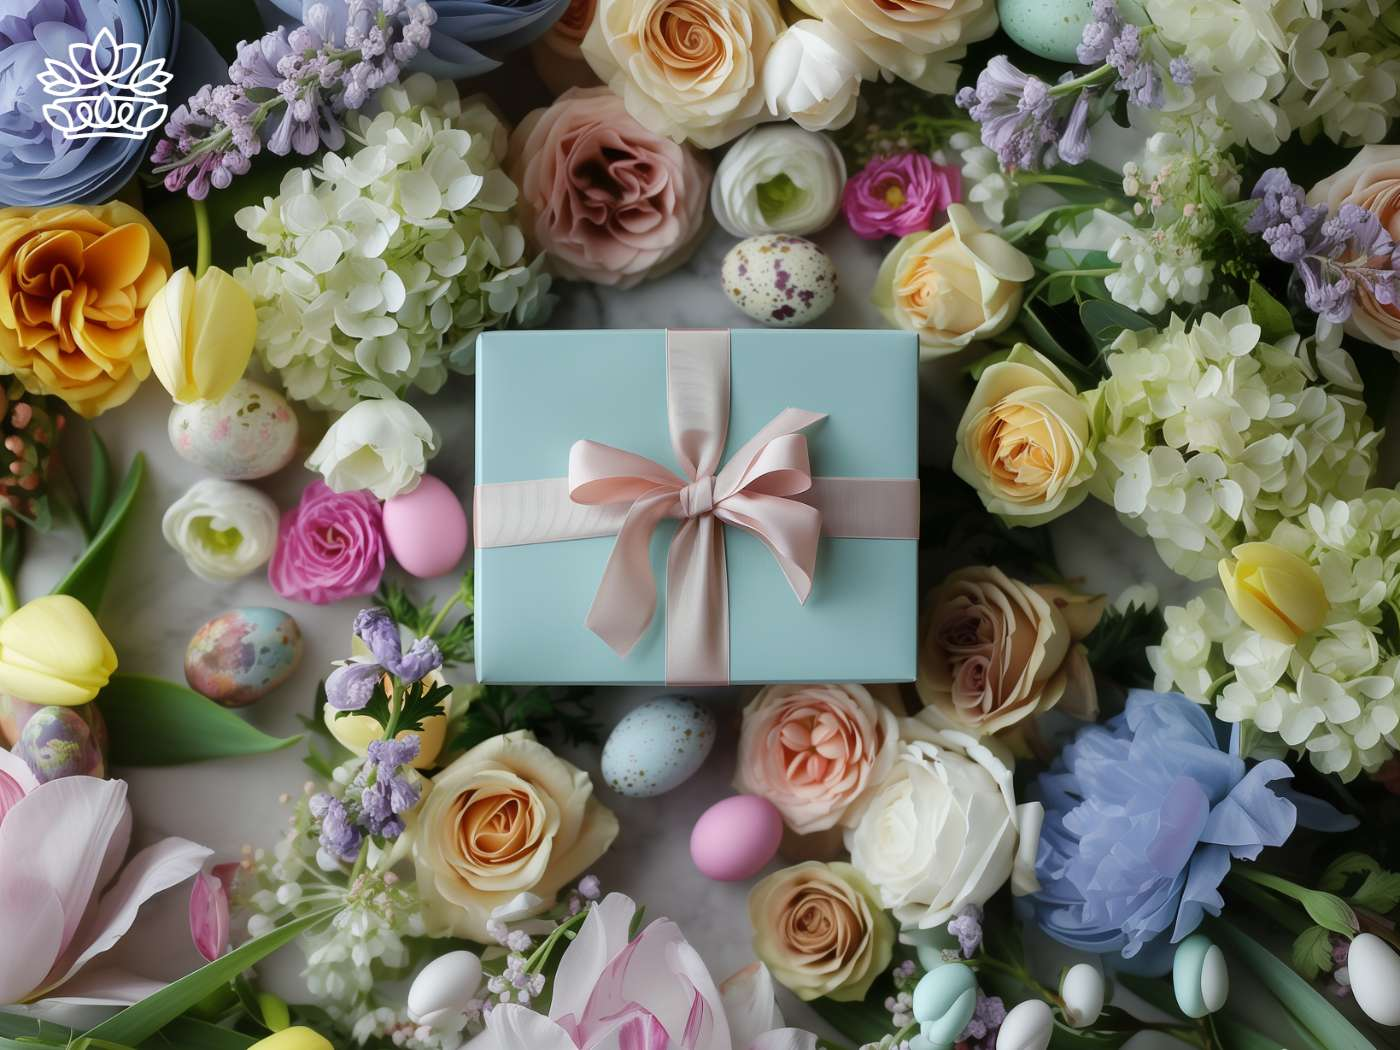 Luxurious Easter gift box amidst a colorful arrangement of spring flowers and Easter eggs, suggesting the elegance of a Pottery Barn style, complete with tea towel and Easter bunny accents, part of the Easter Collection by Fabulous Flowers and Gifts.